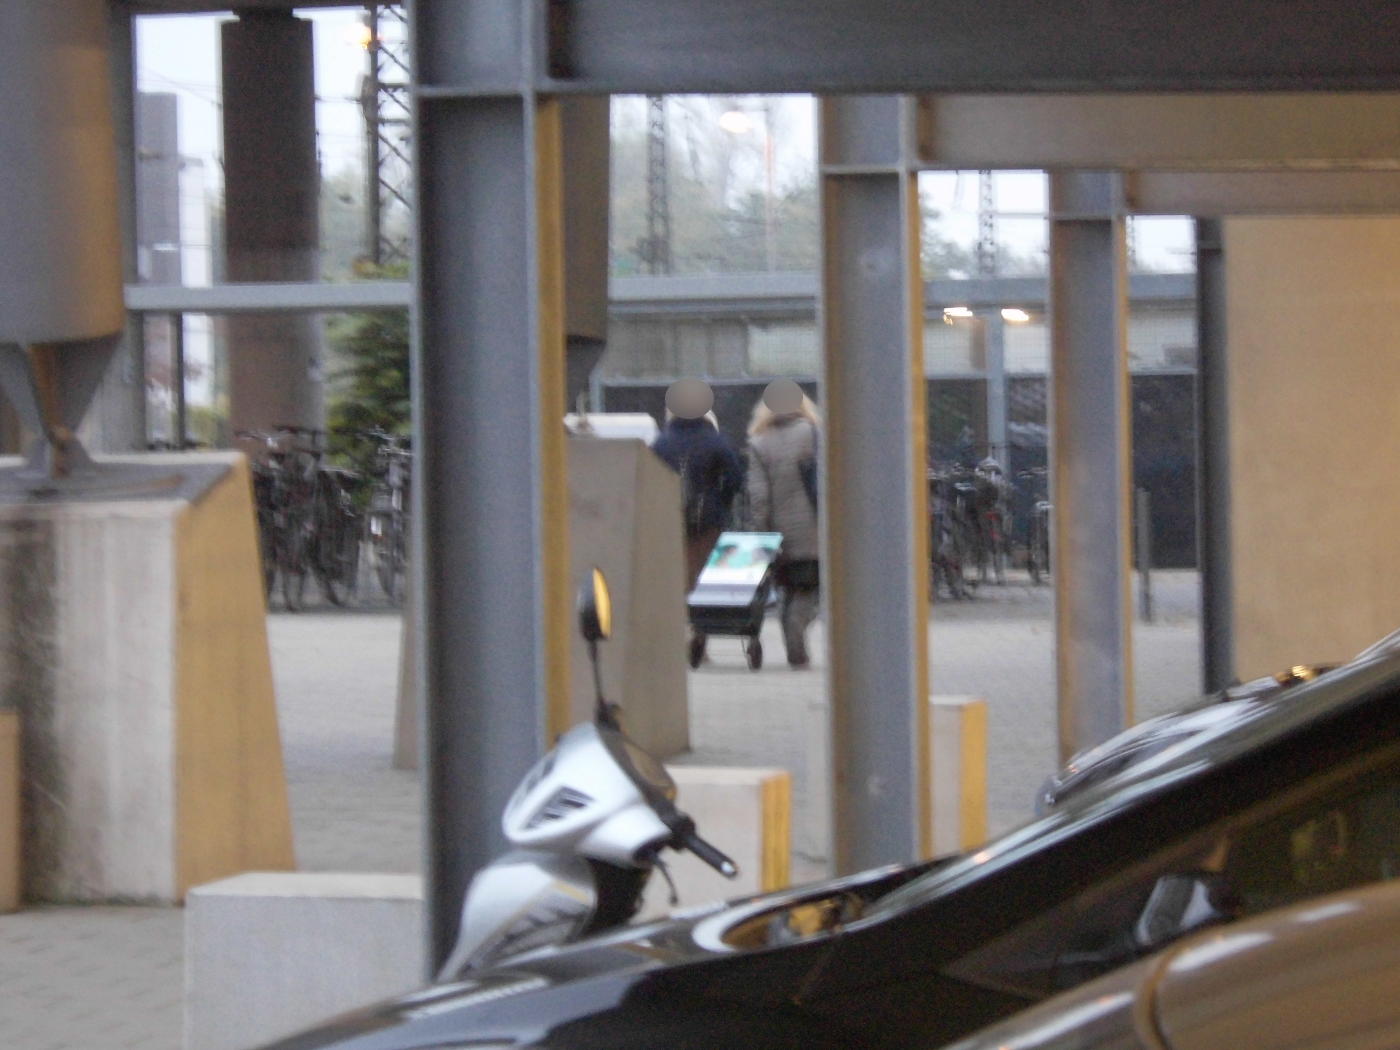 Wiesloch: Jehovah's Witnesses and their snitch frustration